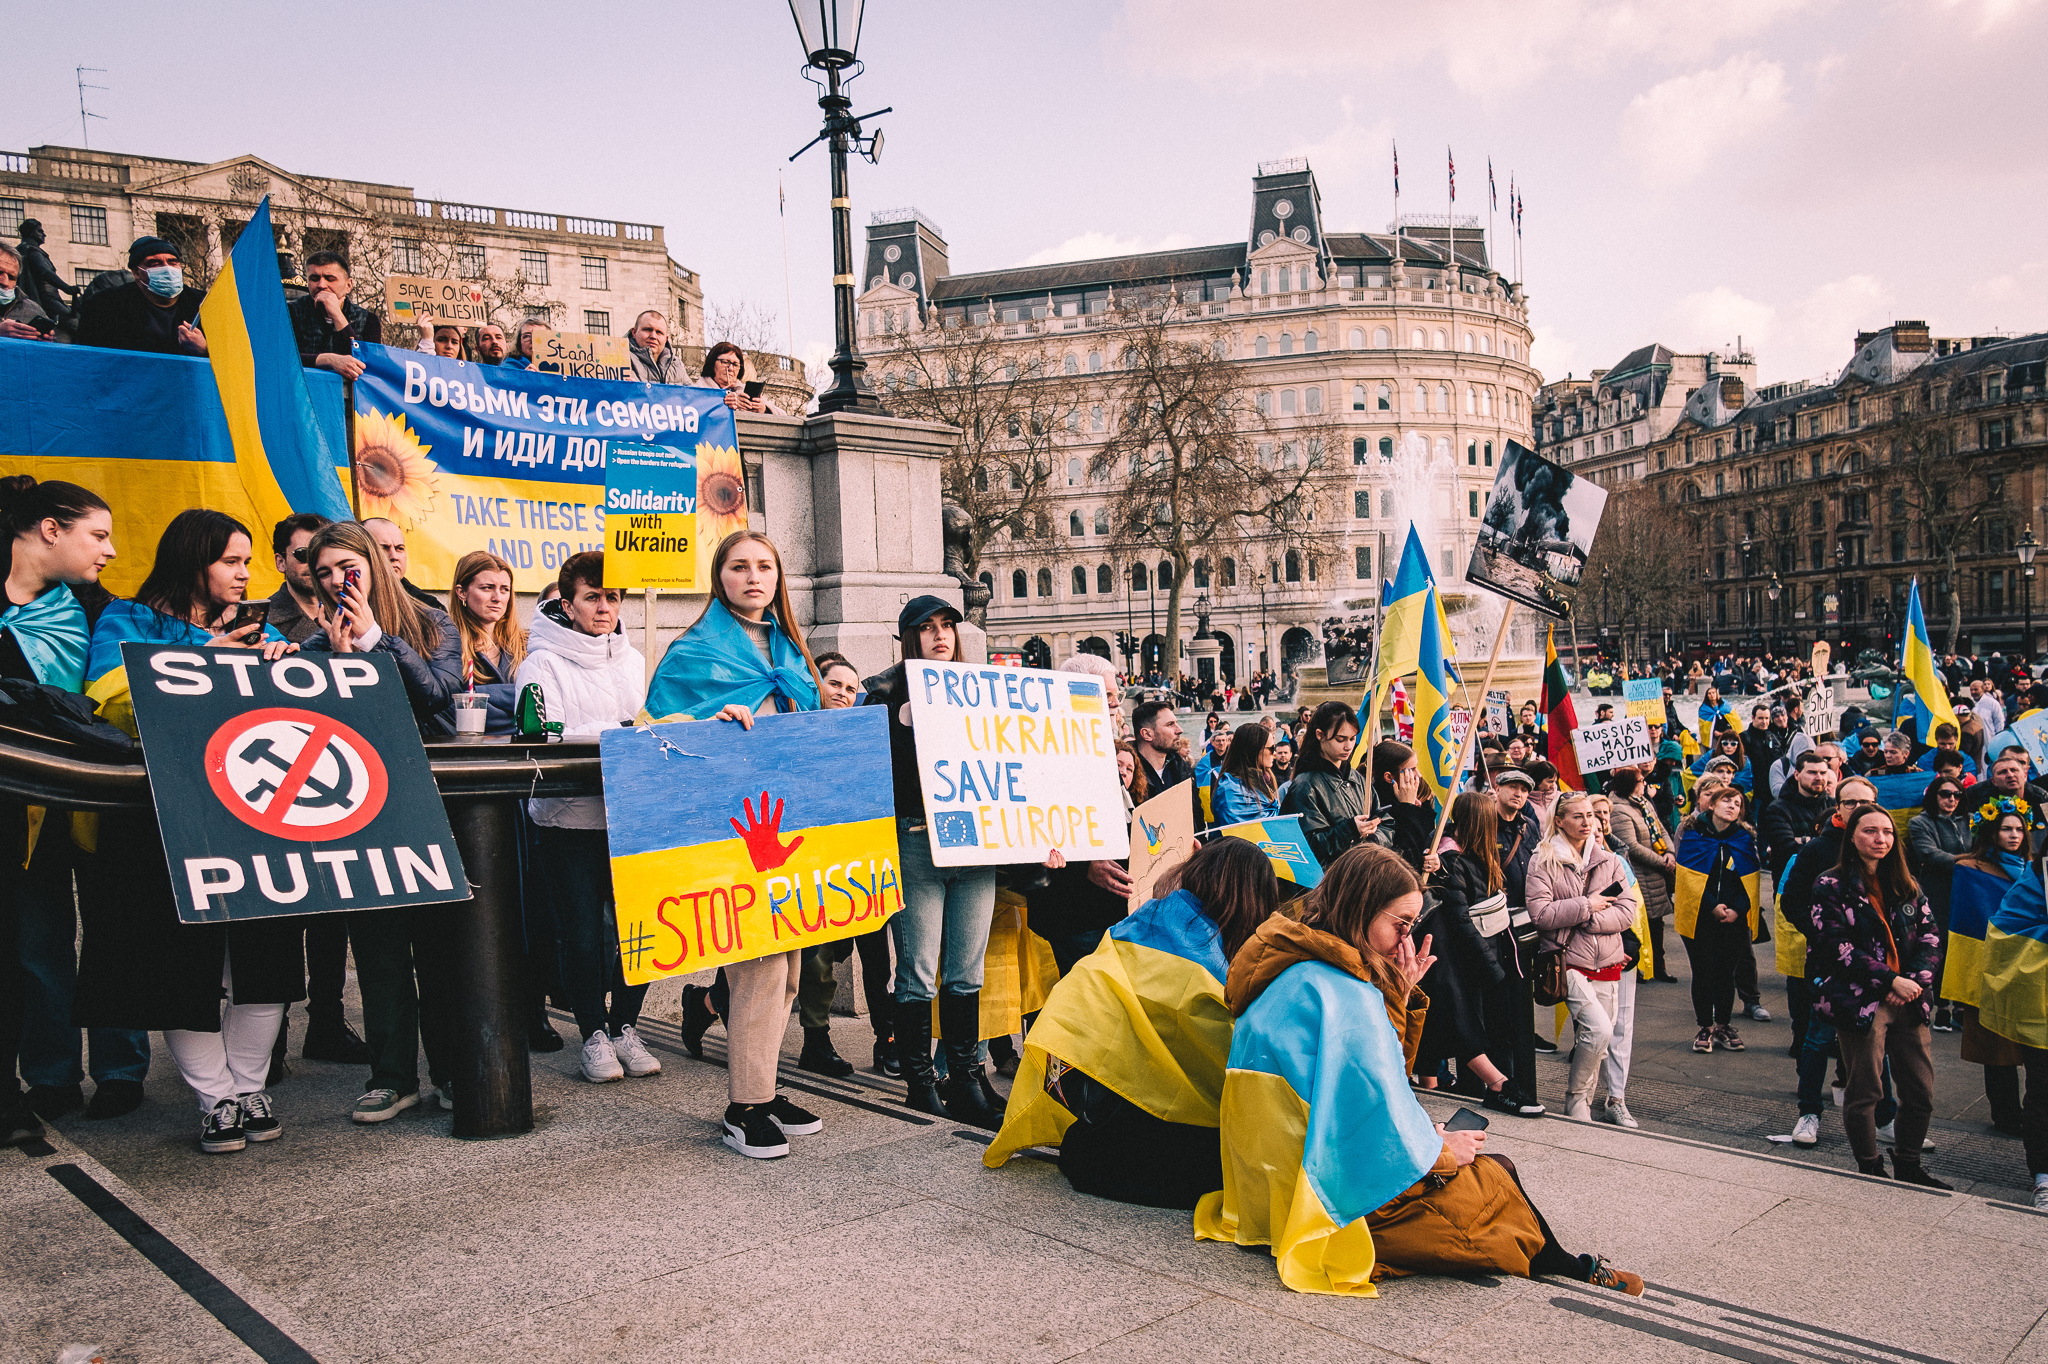 A group of protesters at Trafalgar Square holding sings: Stop Putin, Stop Russia